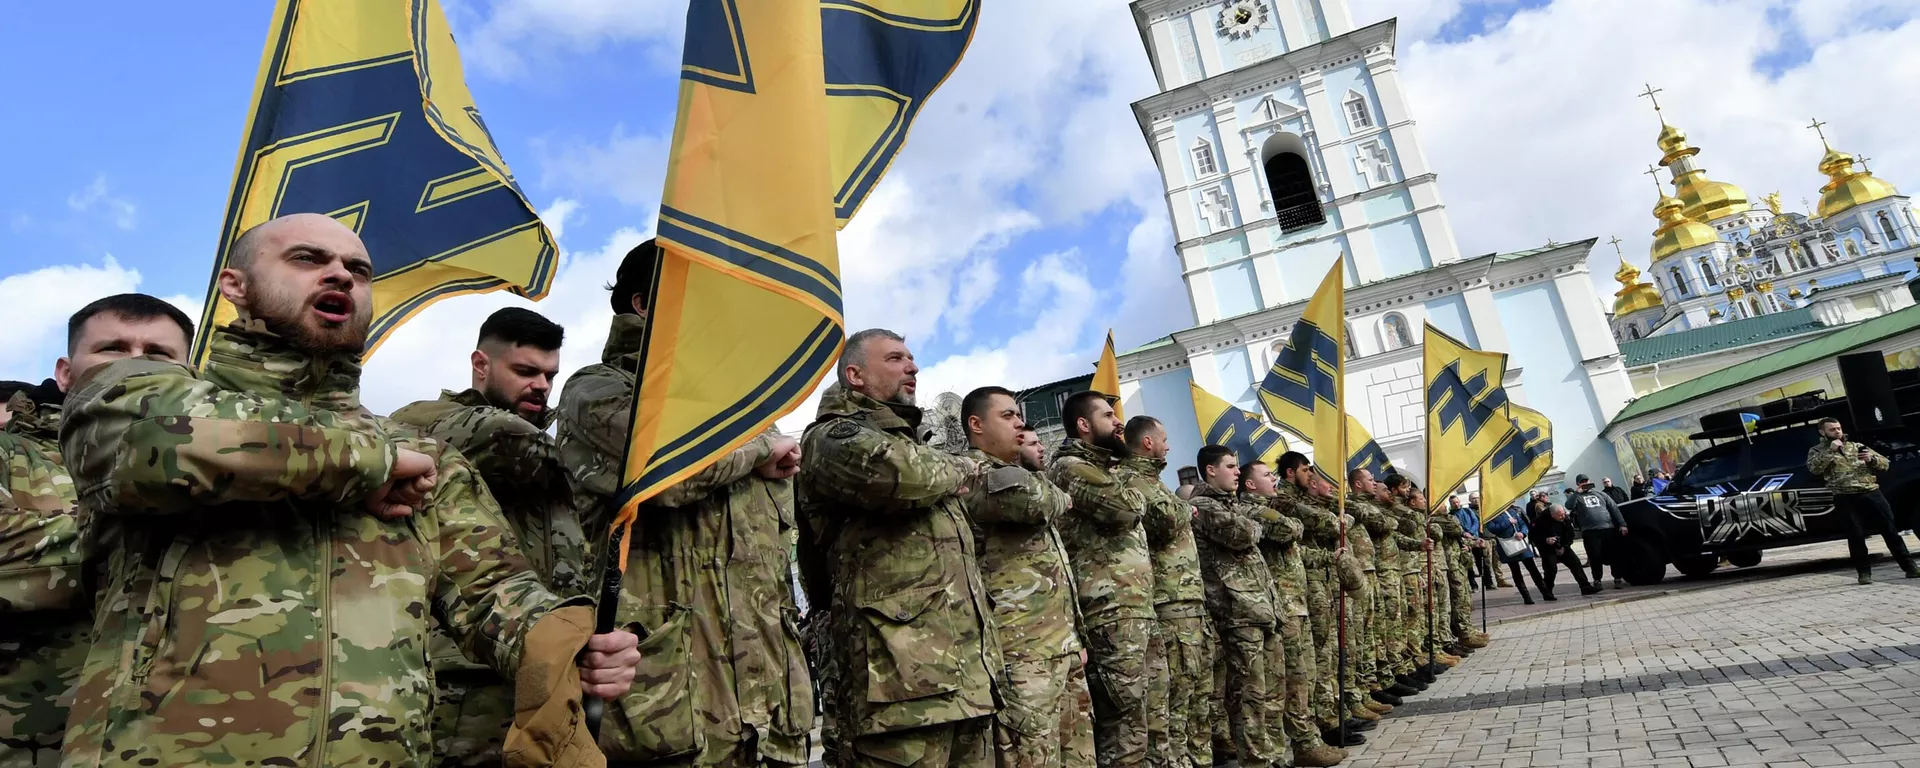 Veterans of the Azov volunteer battalion, who took part in the war in Donbass, salute during the mass rally called No surrender in Kiev on March 14, 2020. - Around fifteen thousands participants rallied despite the ban on holding mass events because of the coronavirus, demanding President Zelensky's resignation. (Photo by Sergei SUPINSKY / AFP) - Sputnik International, 1920, 11.05.2022